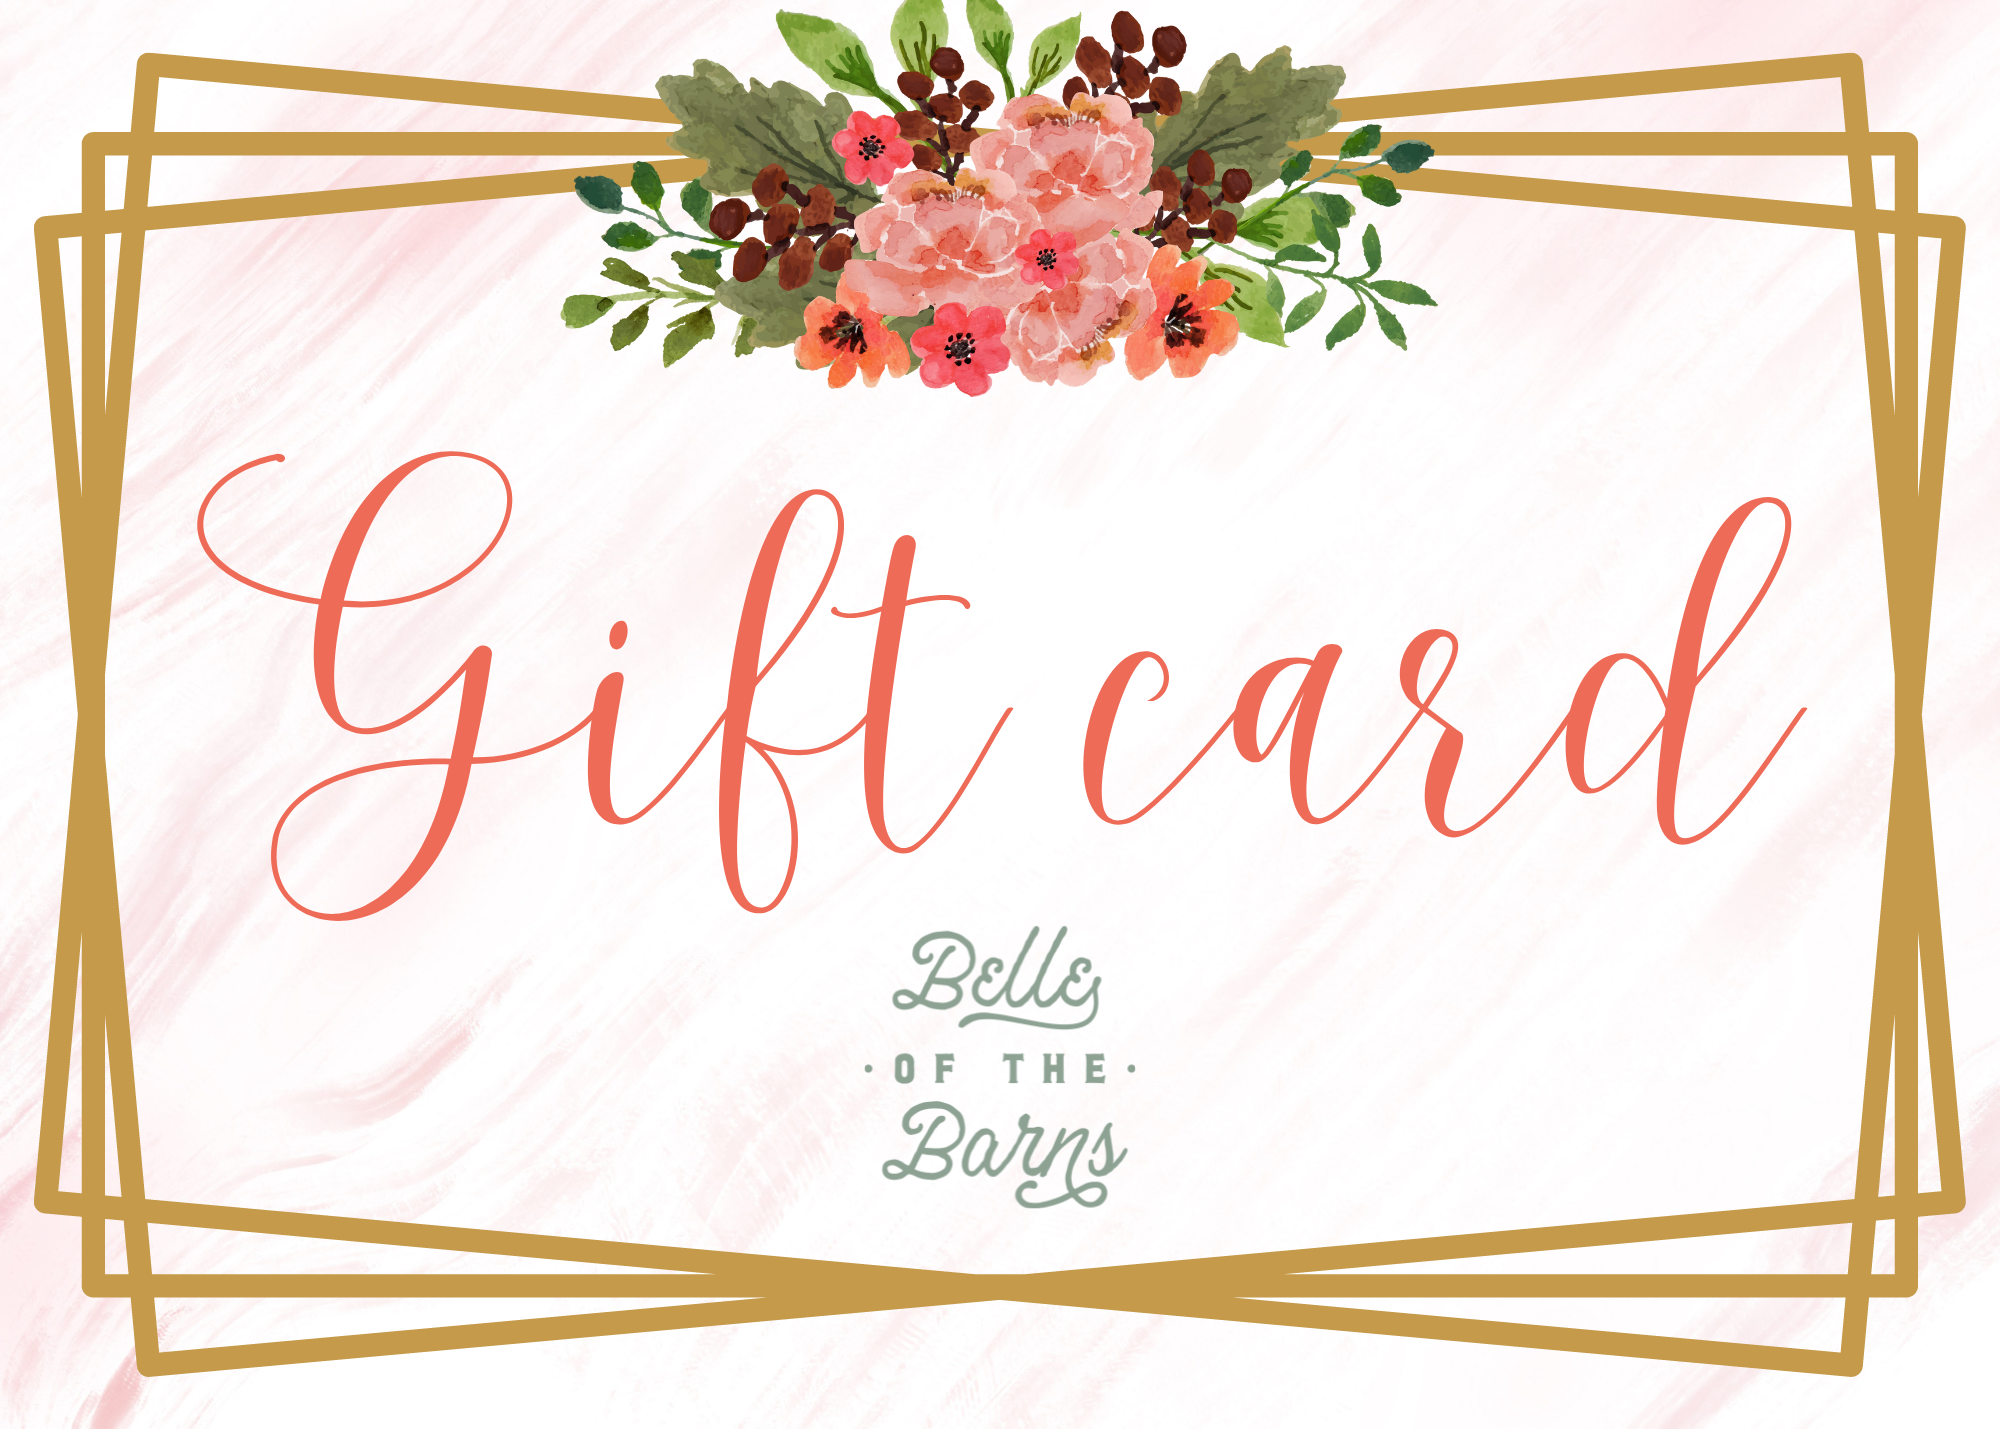 Belle of the Barns GIFT CARD